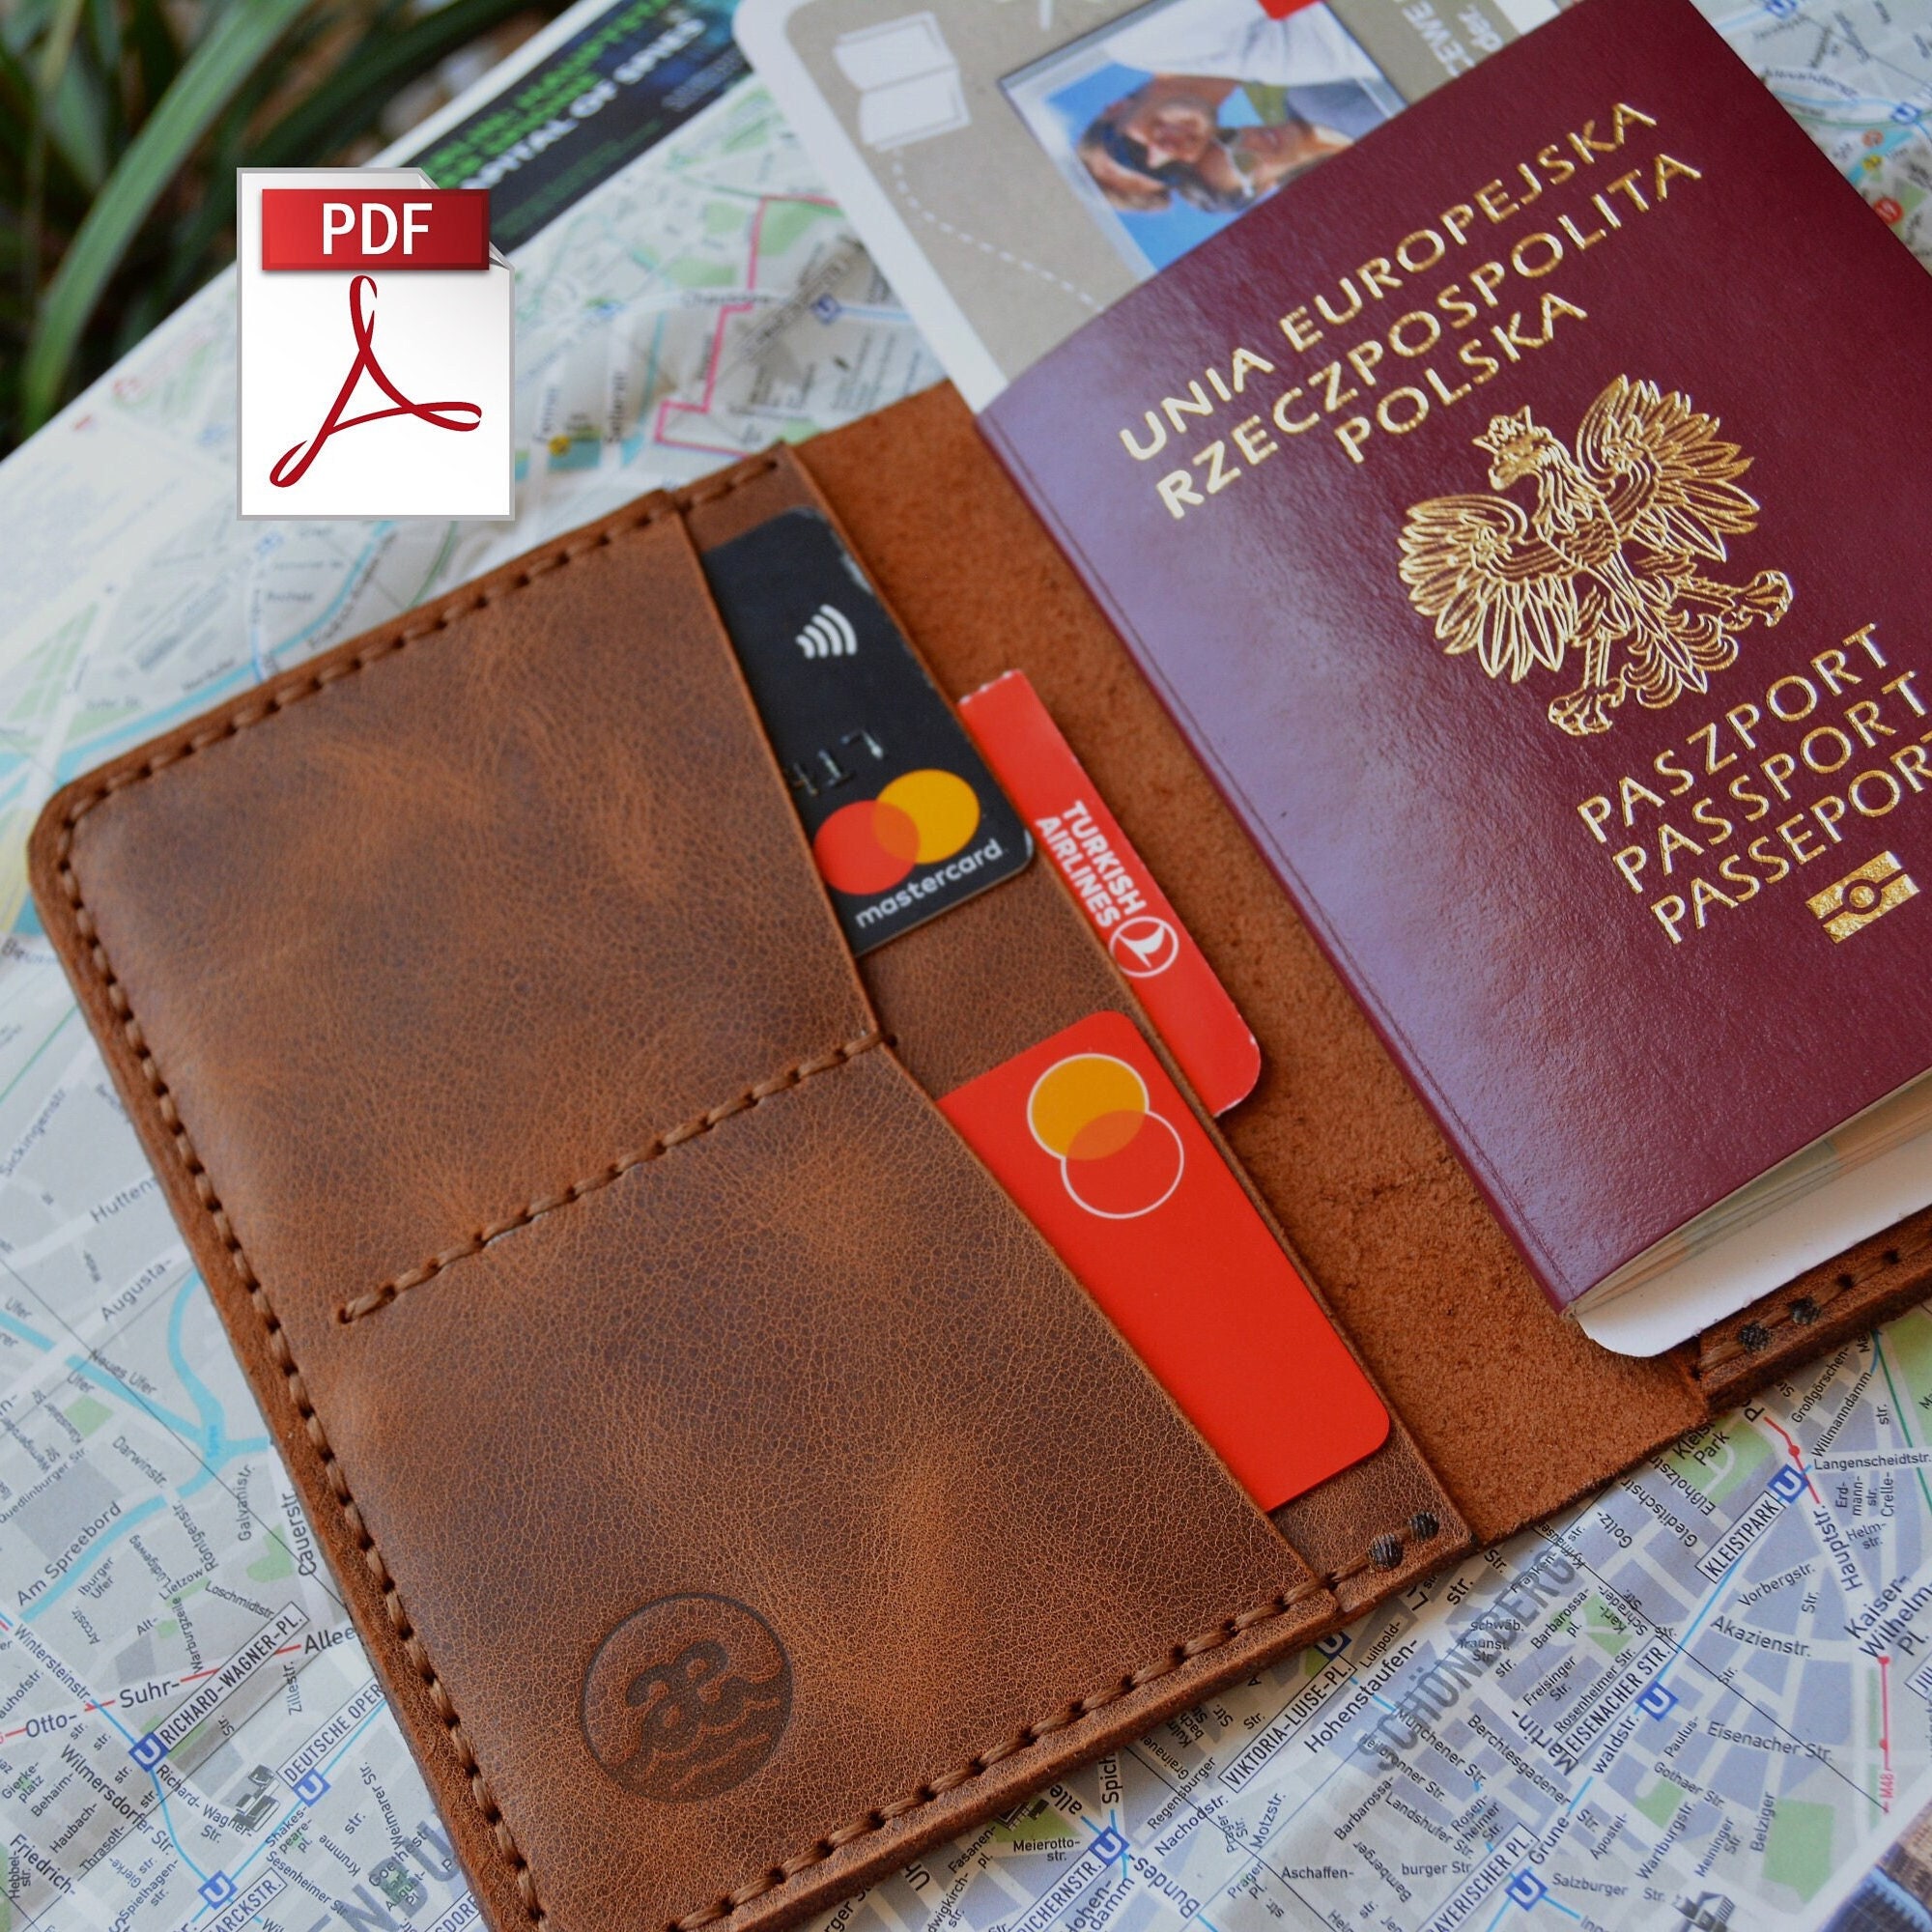 Rustico AC0160-0002 Leather Passport Cover for Unisex Saddle